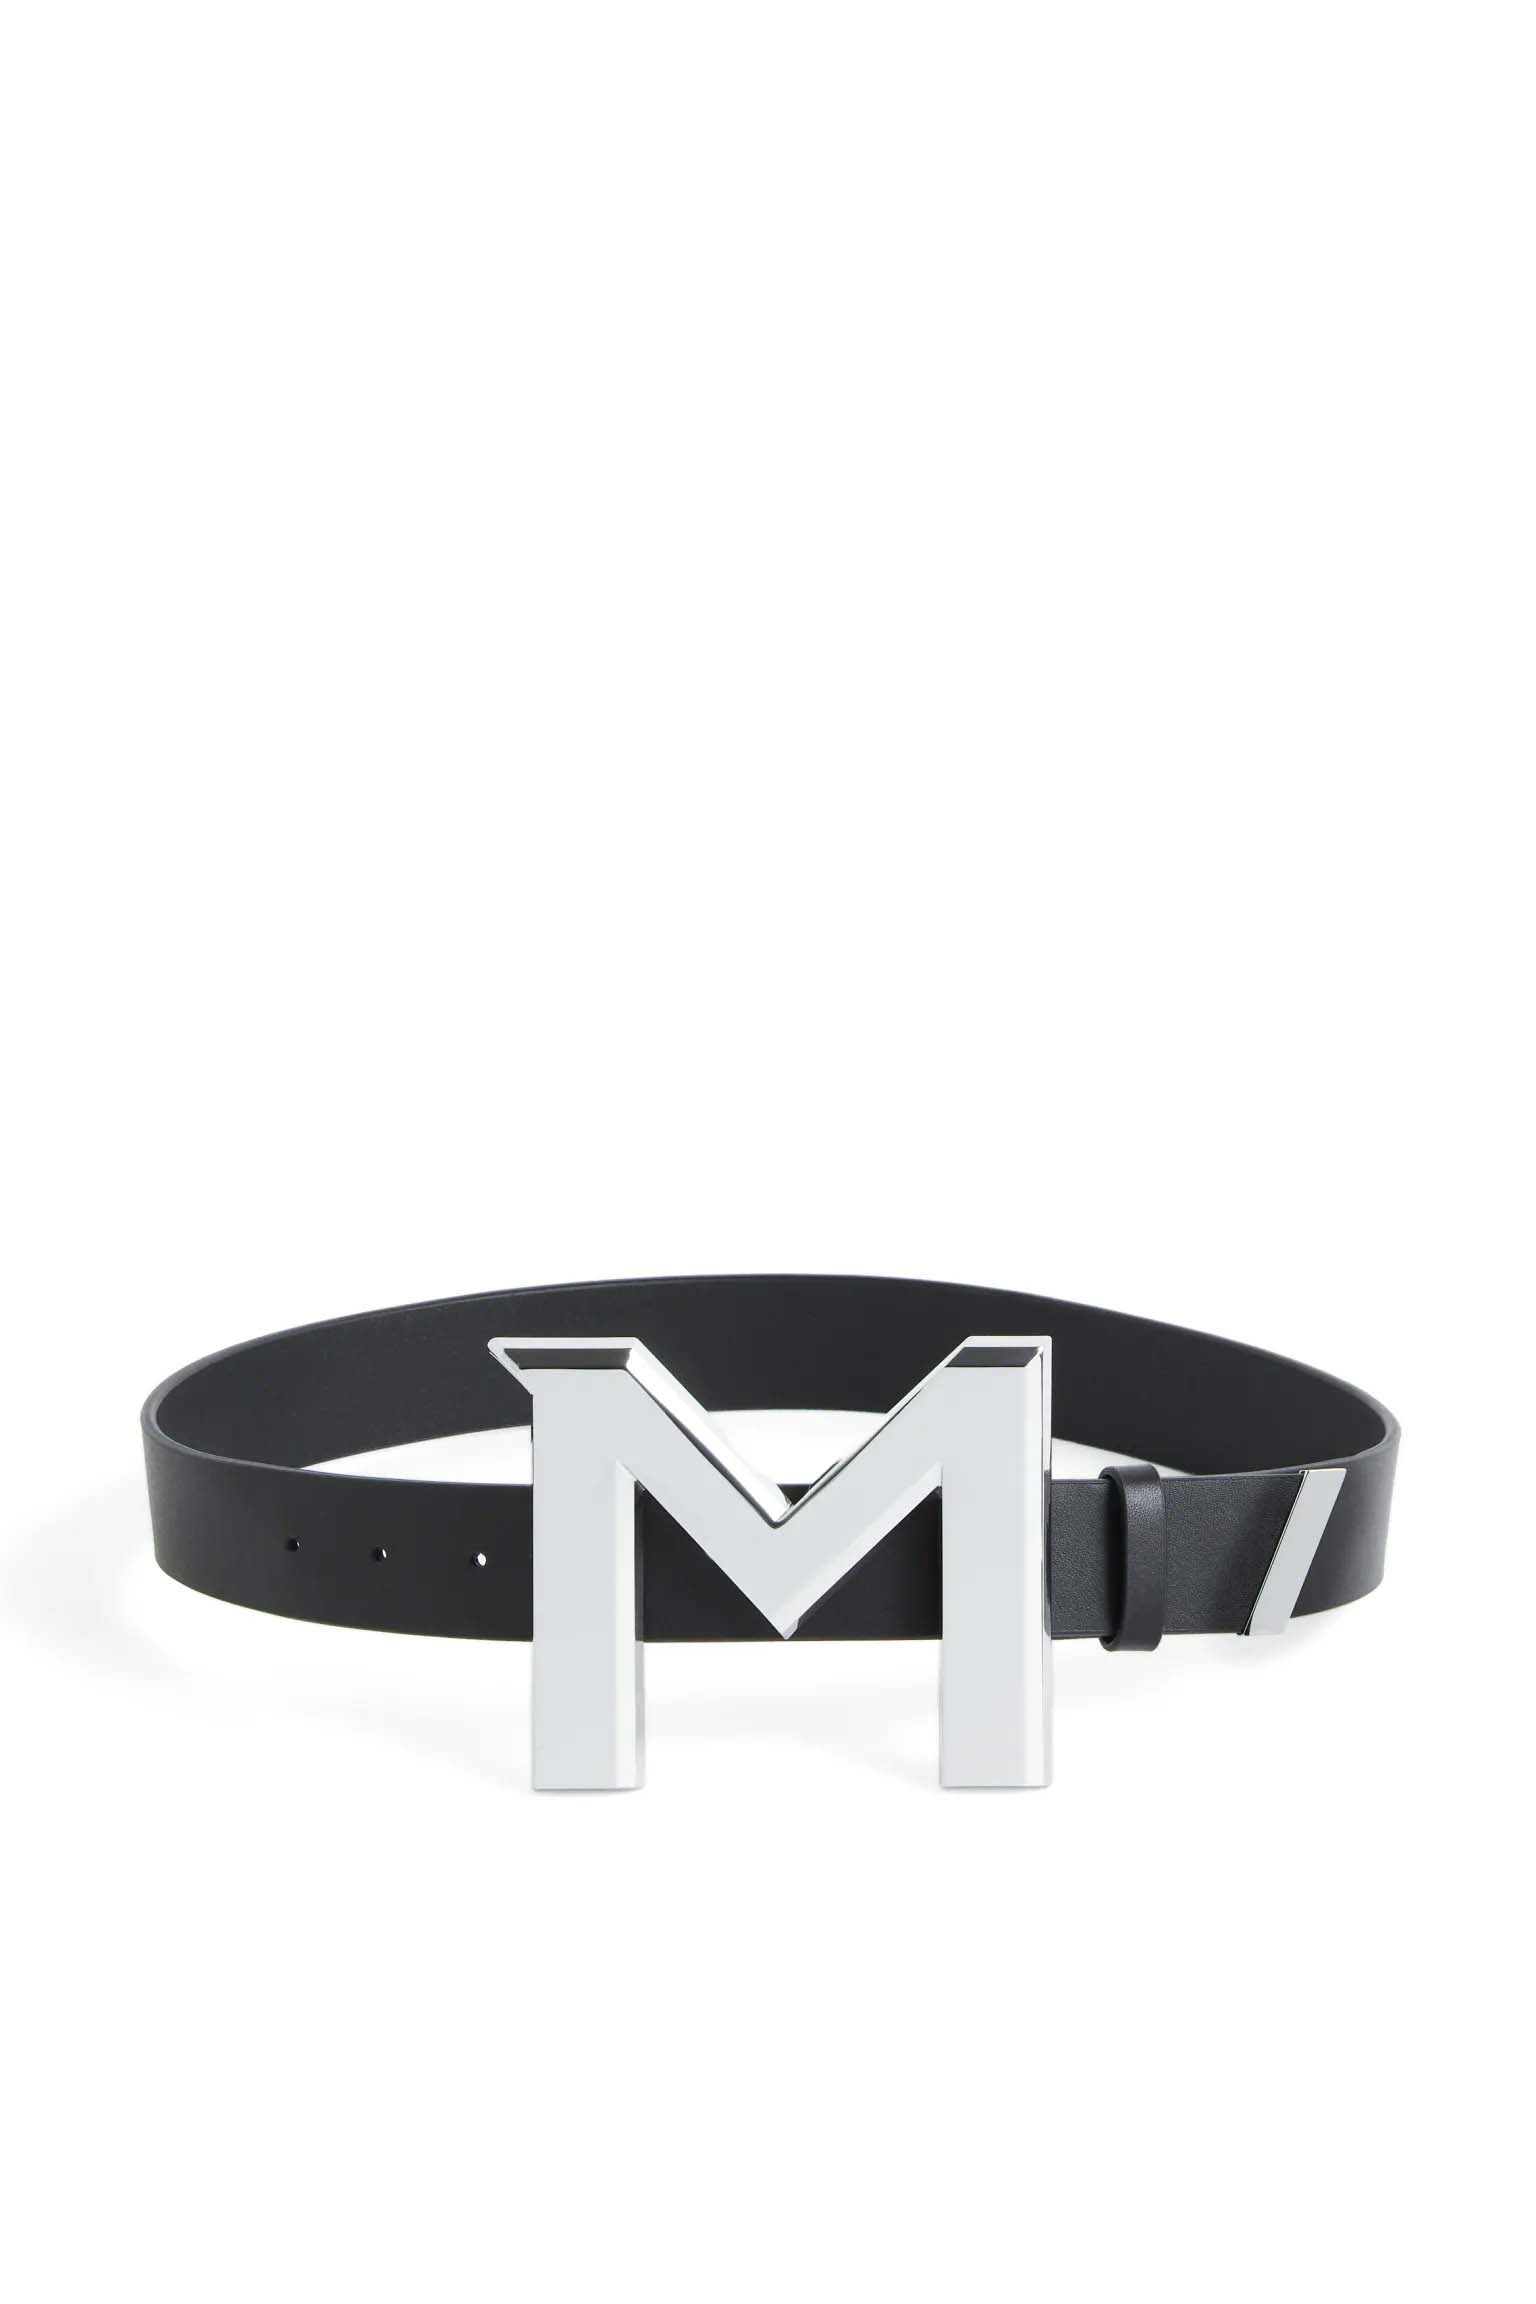 Mugler H&M M-Buckle Leather Belt Black in Leather with Silver-tone